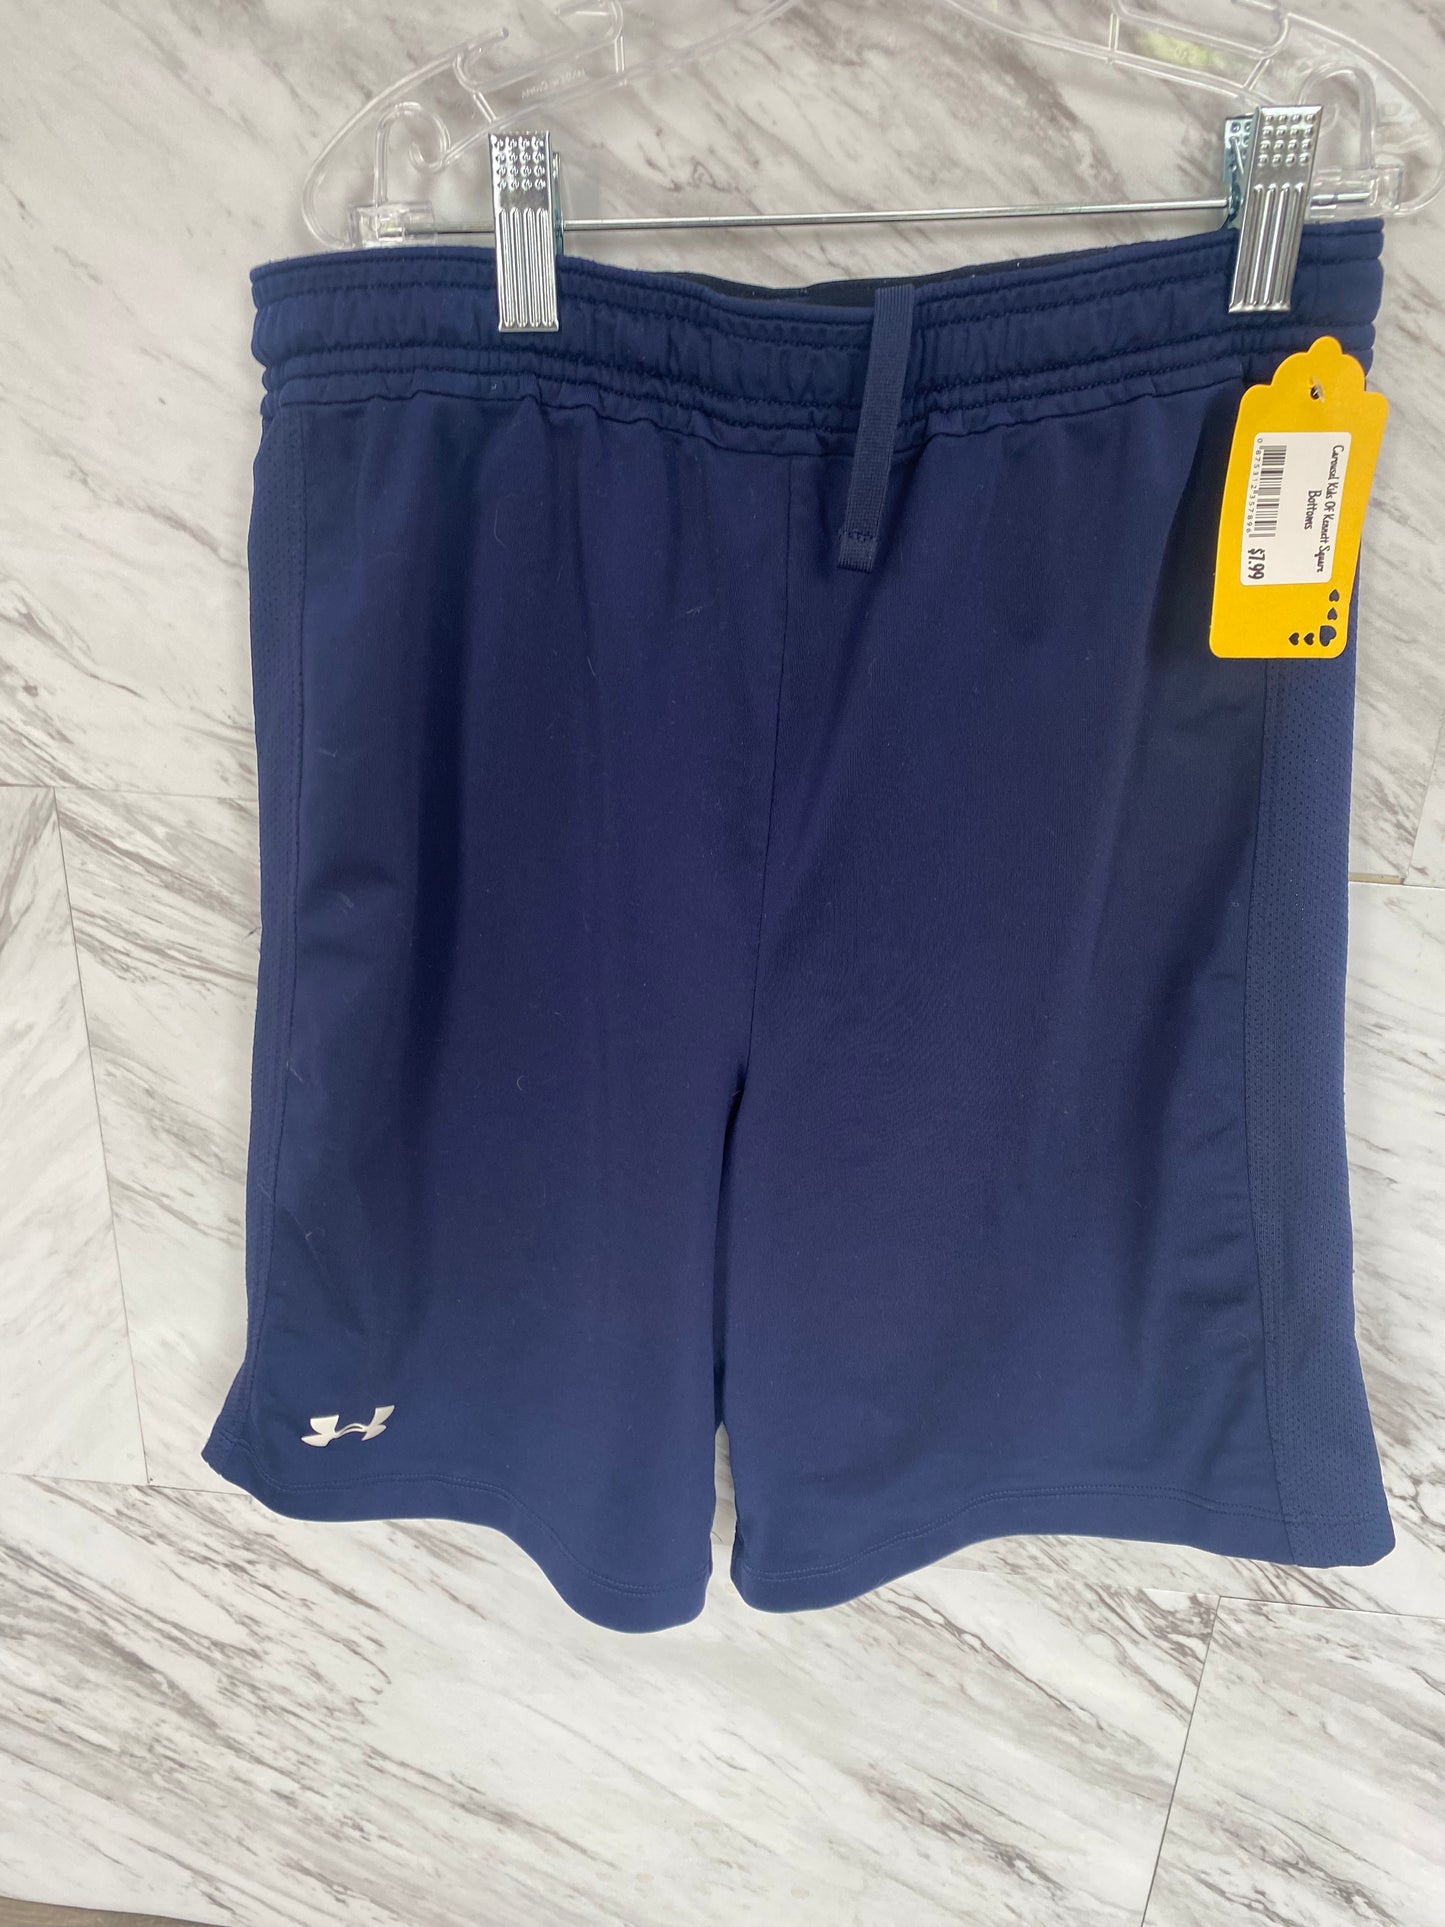 Under Armour Large Bottoms